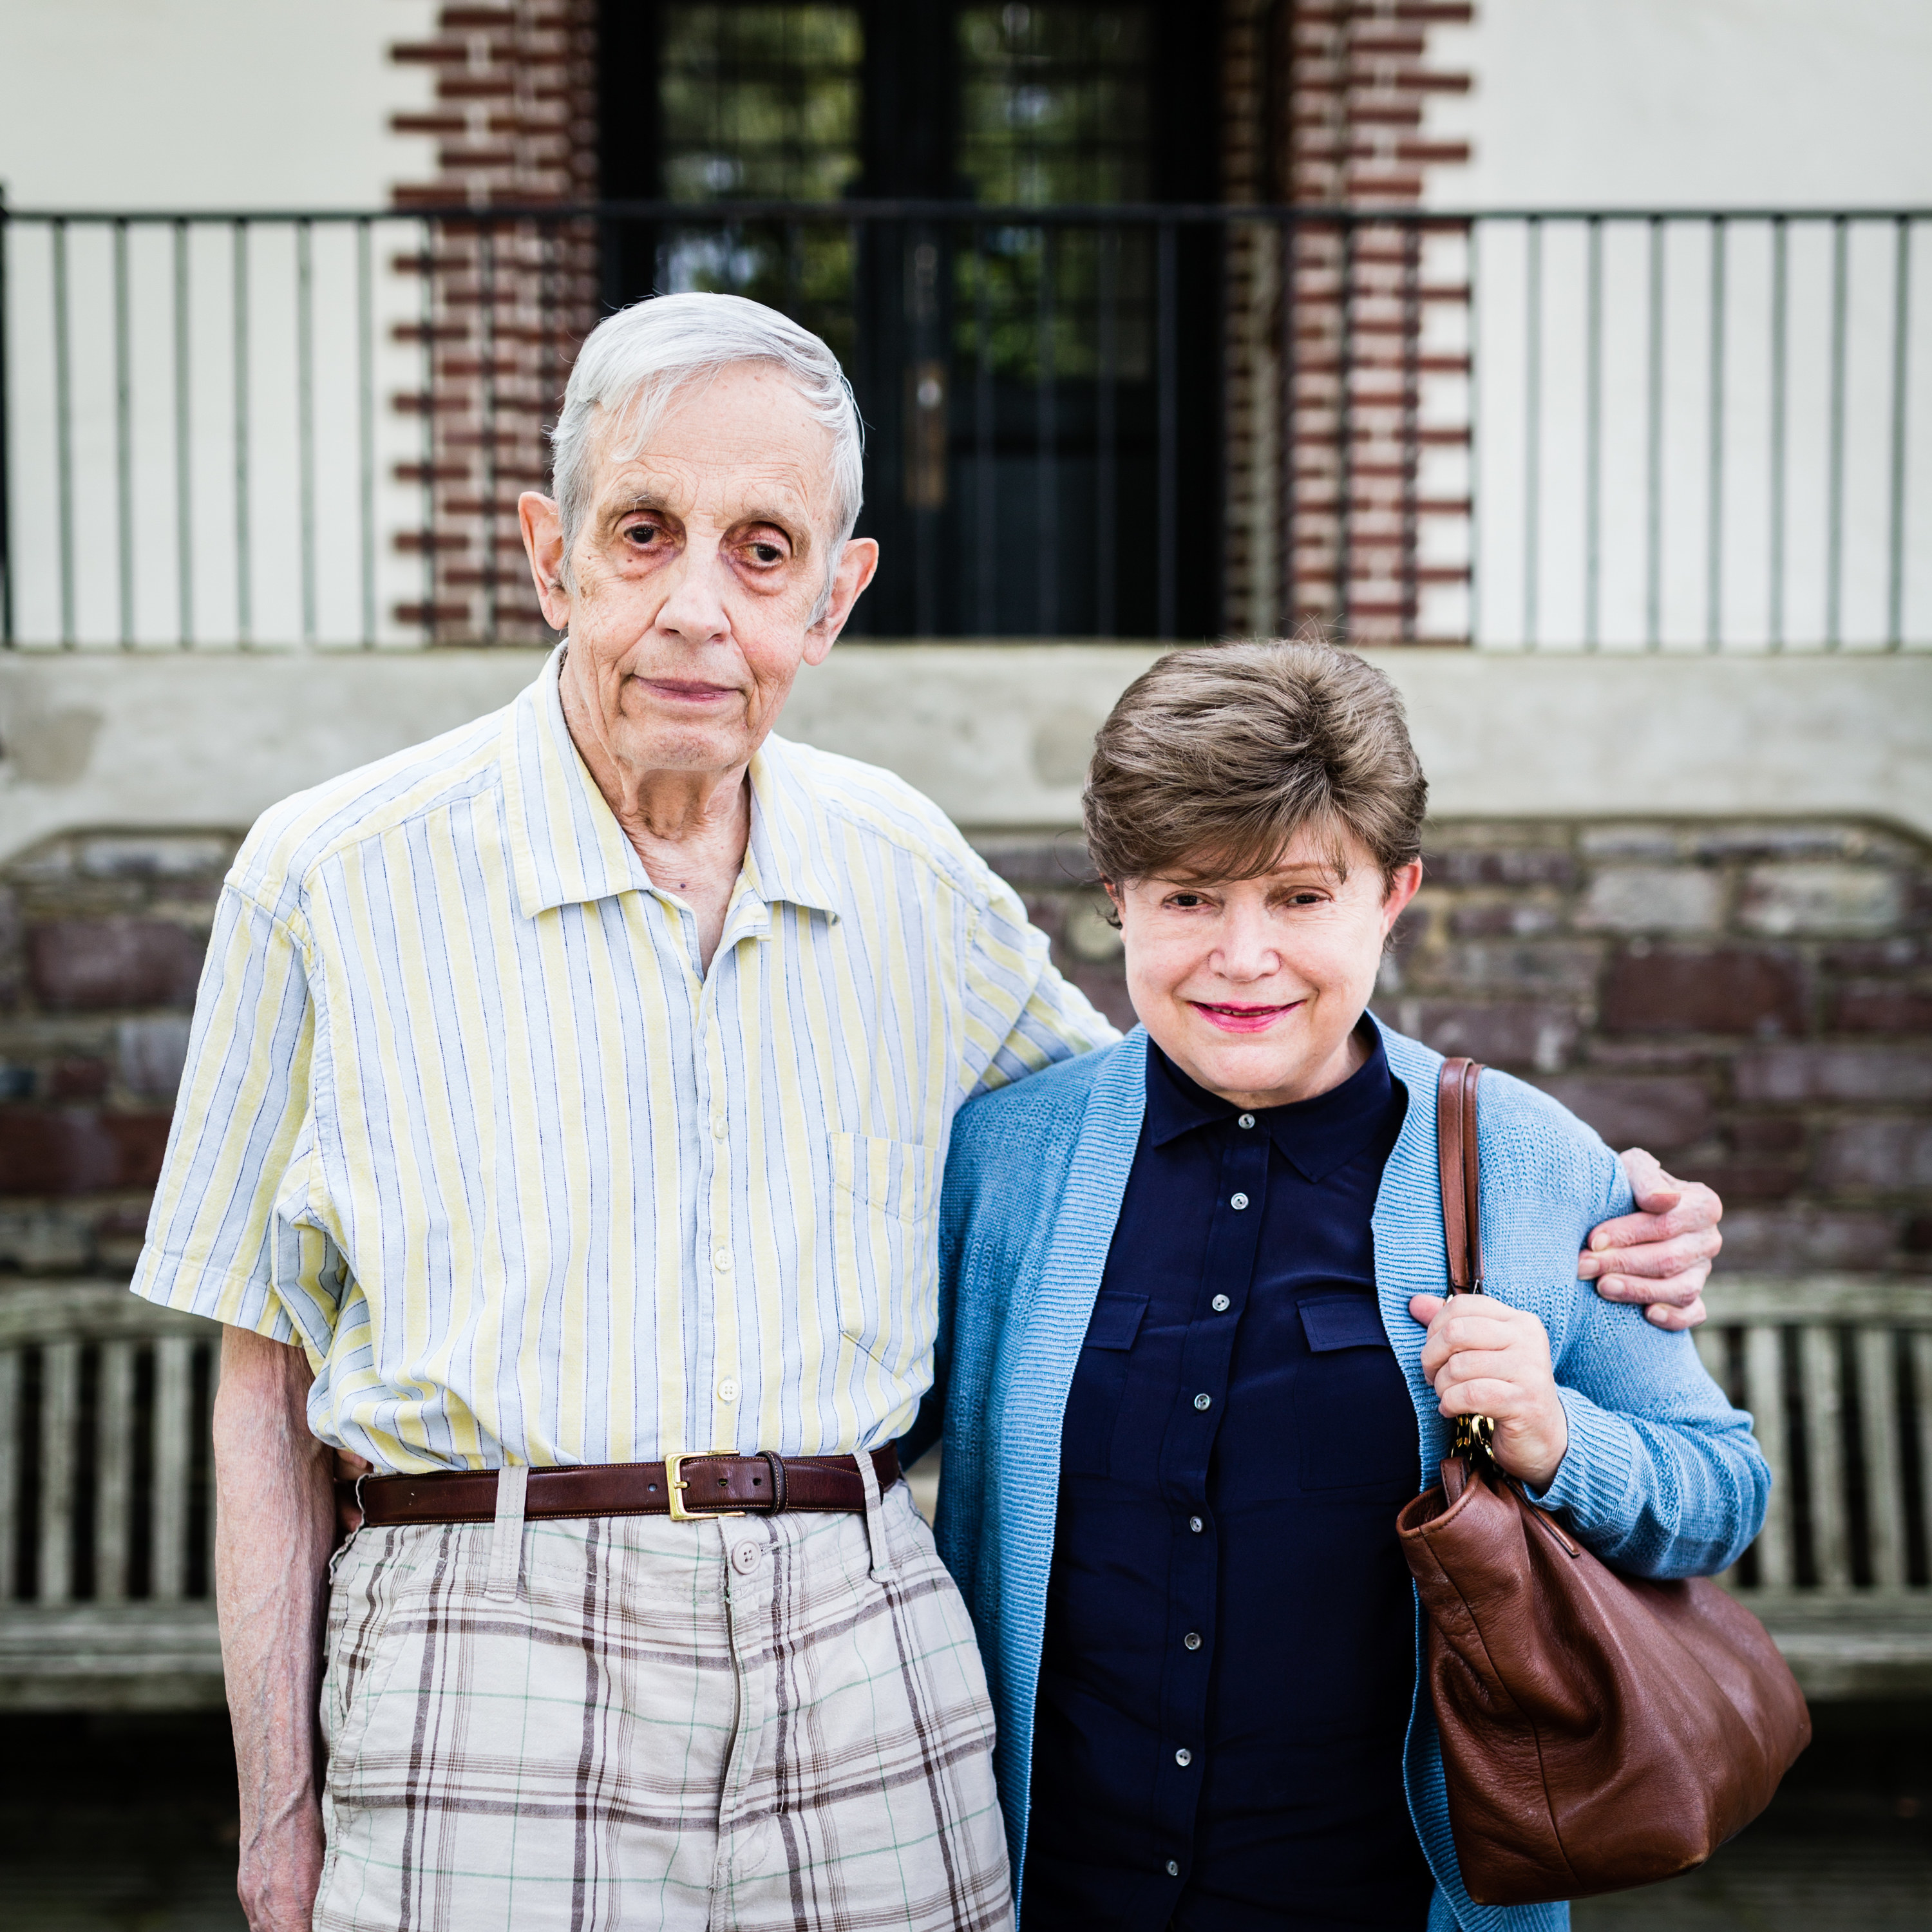 John Nash and wife Alicia Nash pose for a photo on August 9, 2014, in Princeton, New Jersey